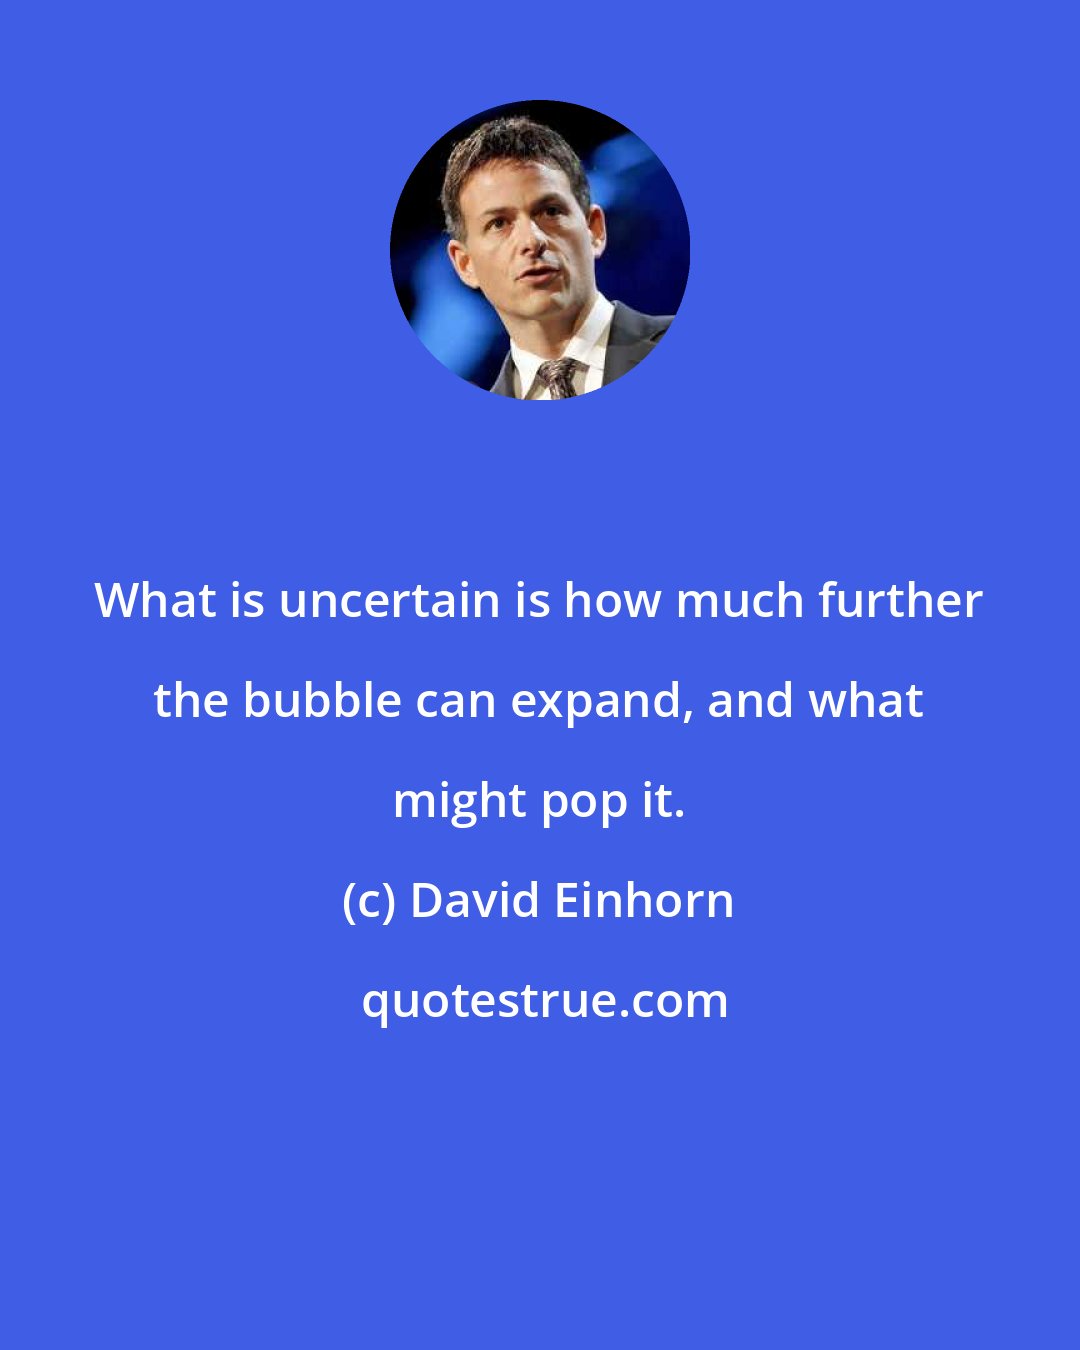 David Einhorn: What is uncertain is how much further the bubble can expand, and what might pop it.